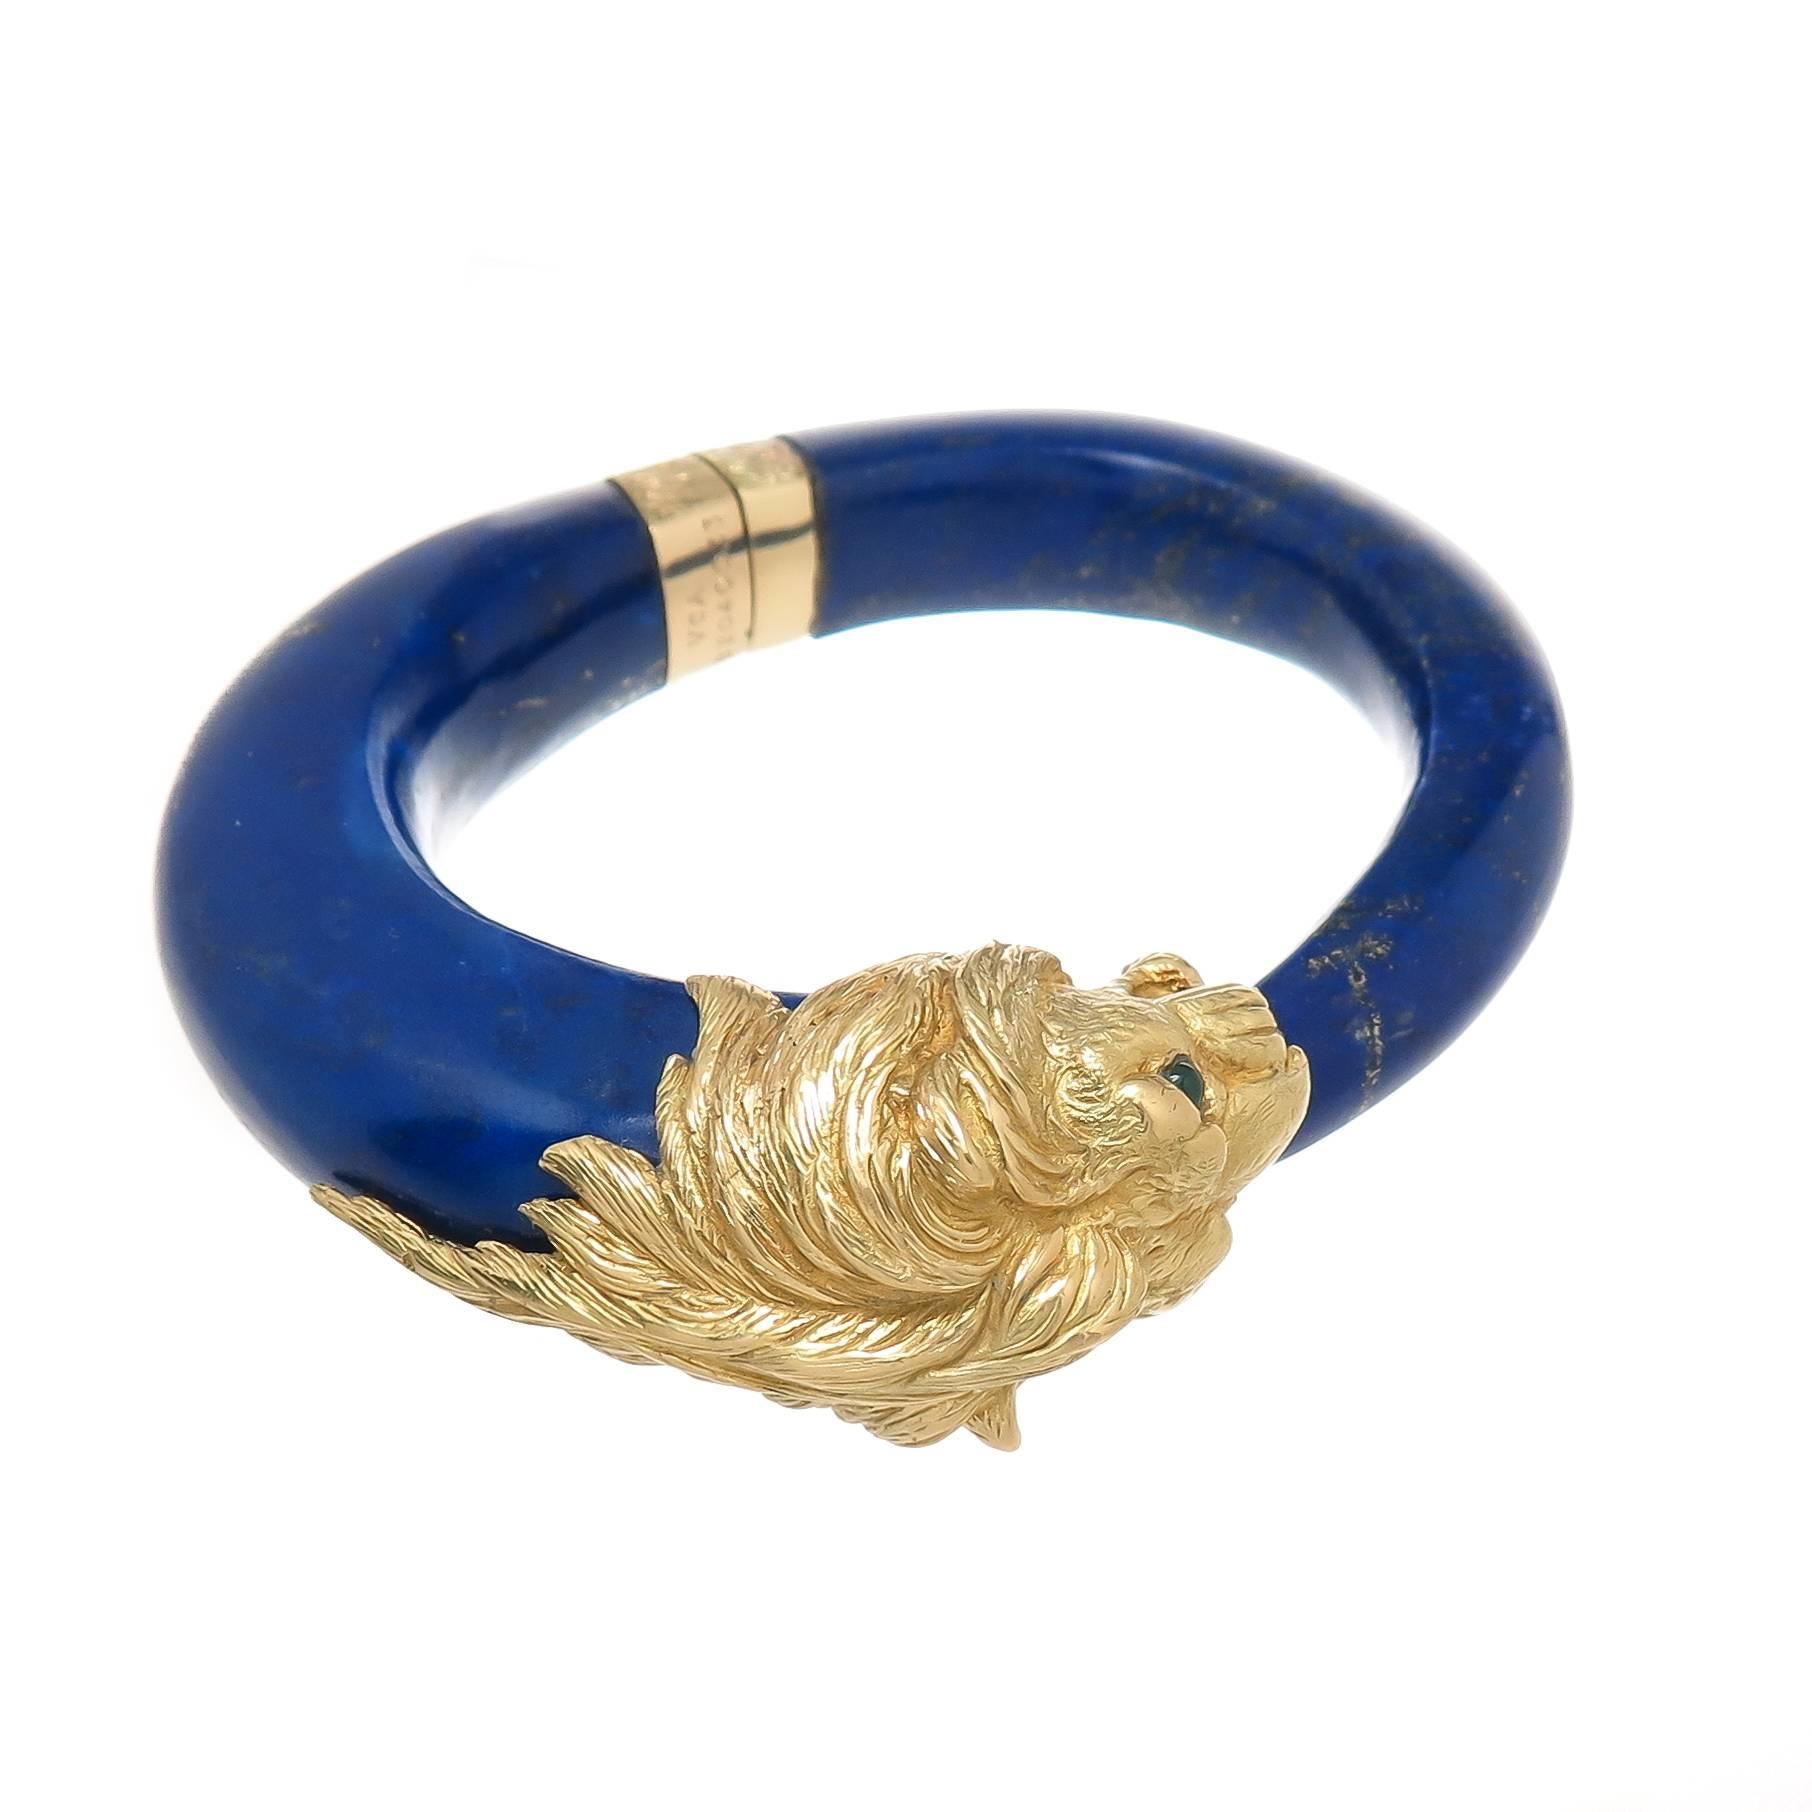 Circa 1960s Van Cleef and Arpels Lapis Lazuli and 18K Yellow Gold Lion Bracelet. Very detailed and having Emerald Set Eyes. The Lapis is a Gem Blue color with Gold flecks and tapers from 3/8 to 5/8 inch thick.Fitted with a very intricate opening